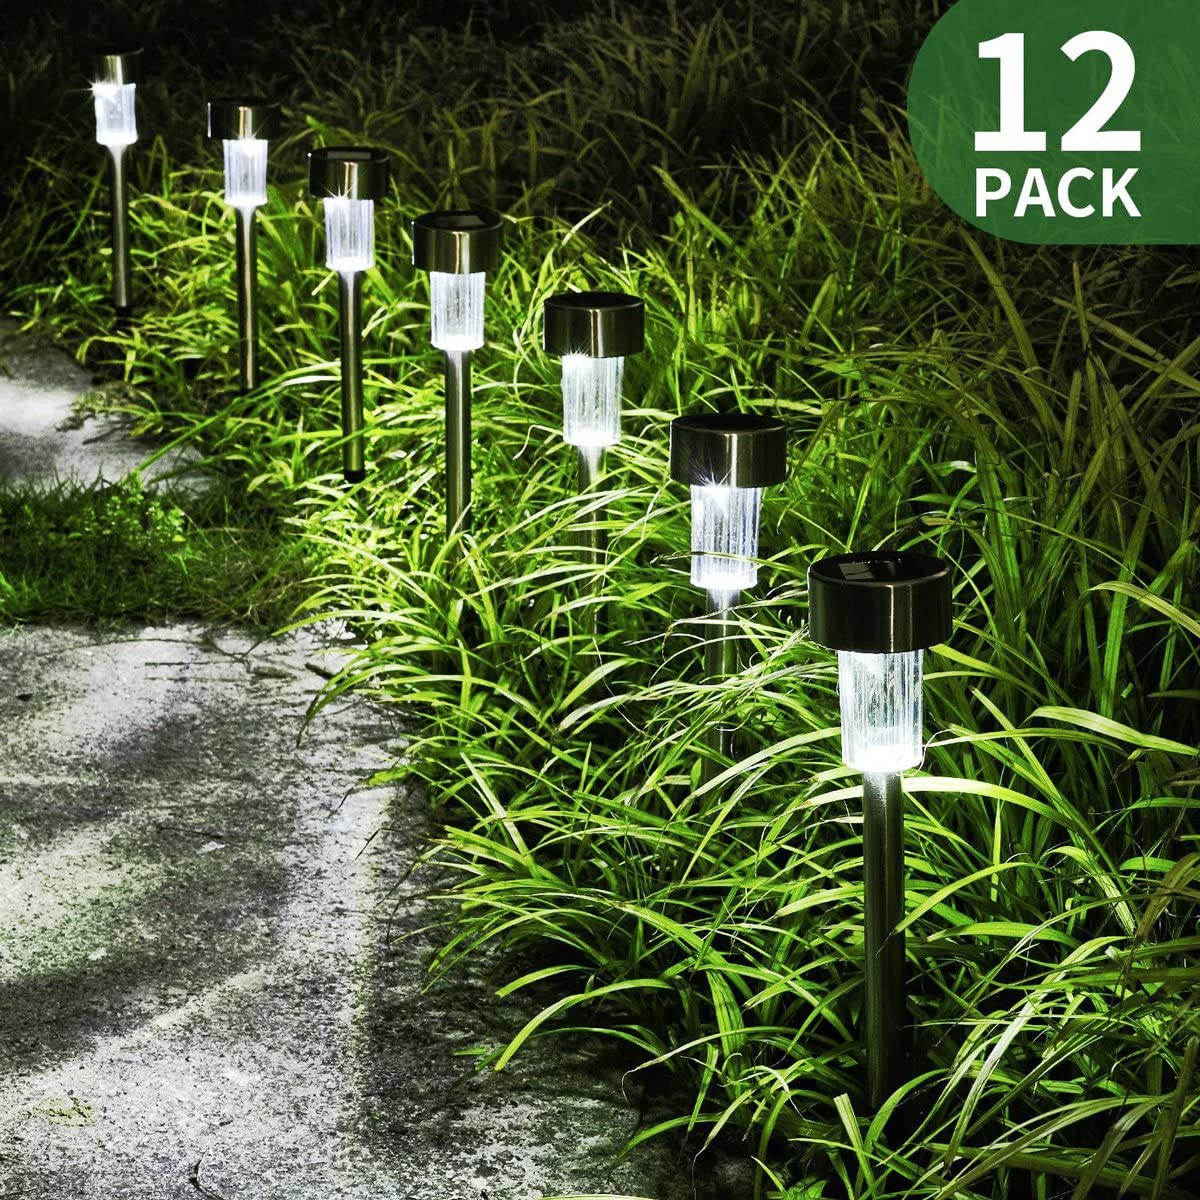 Solar Garden Lights, 12Pack Solar Lights Outdoor - Waterproof, Stainless Steel Outdoor Solar Lights, LED Solar Powered Landscape Lighting for Yard Patio Walkway Landscape In-Ground Spike Pathway - image 2 of 11